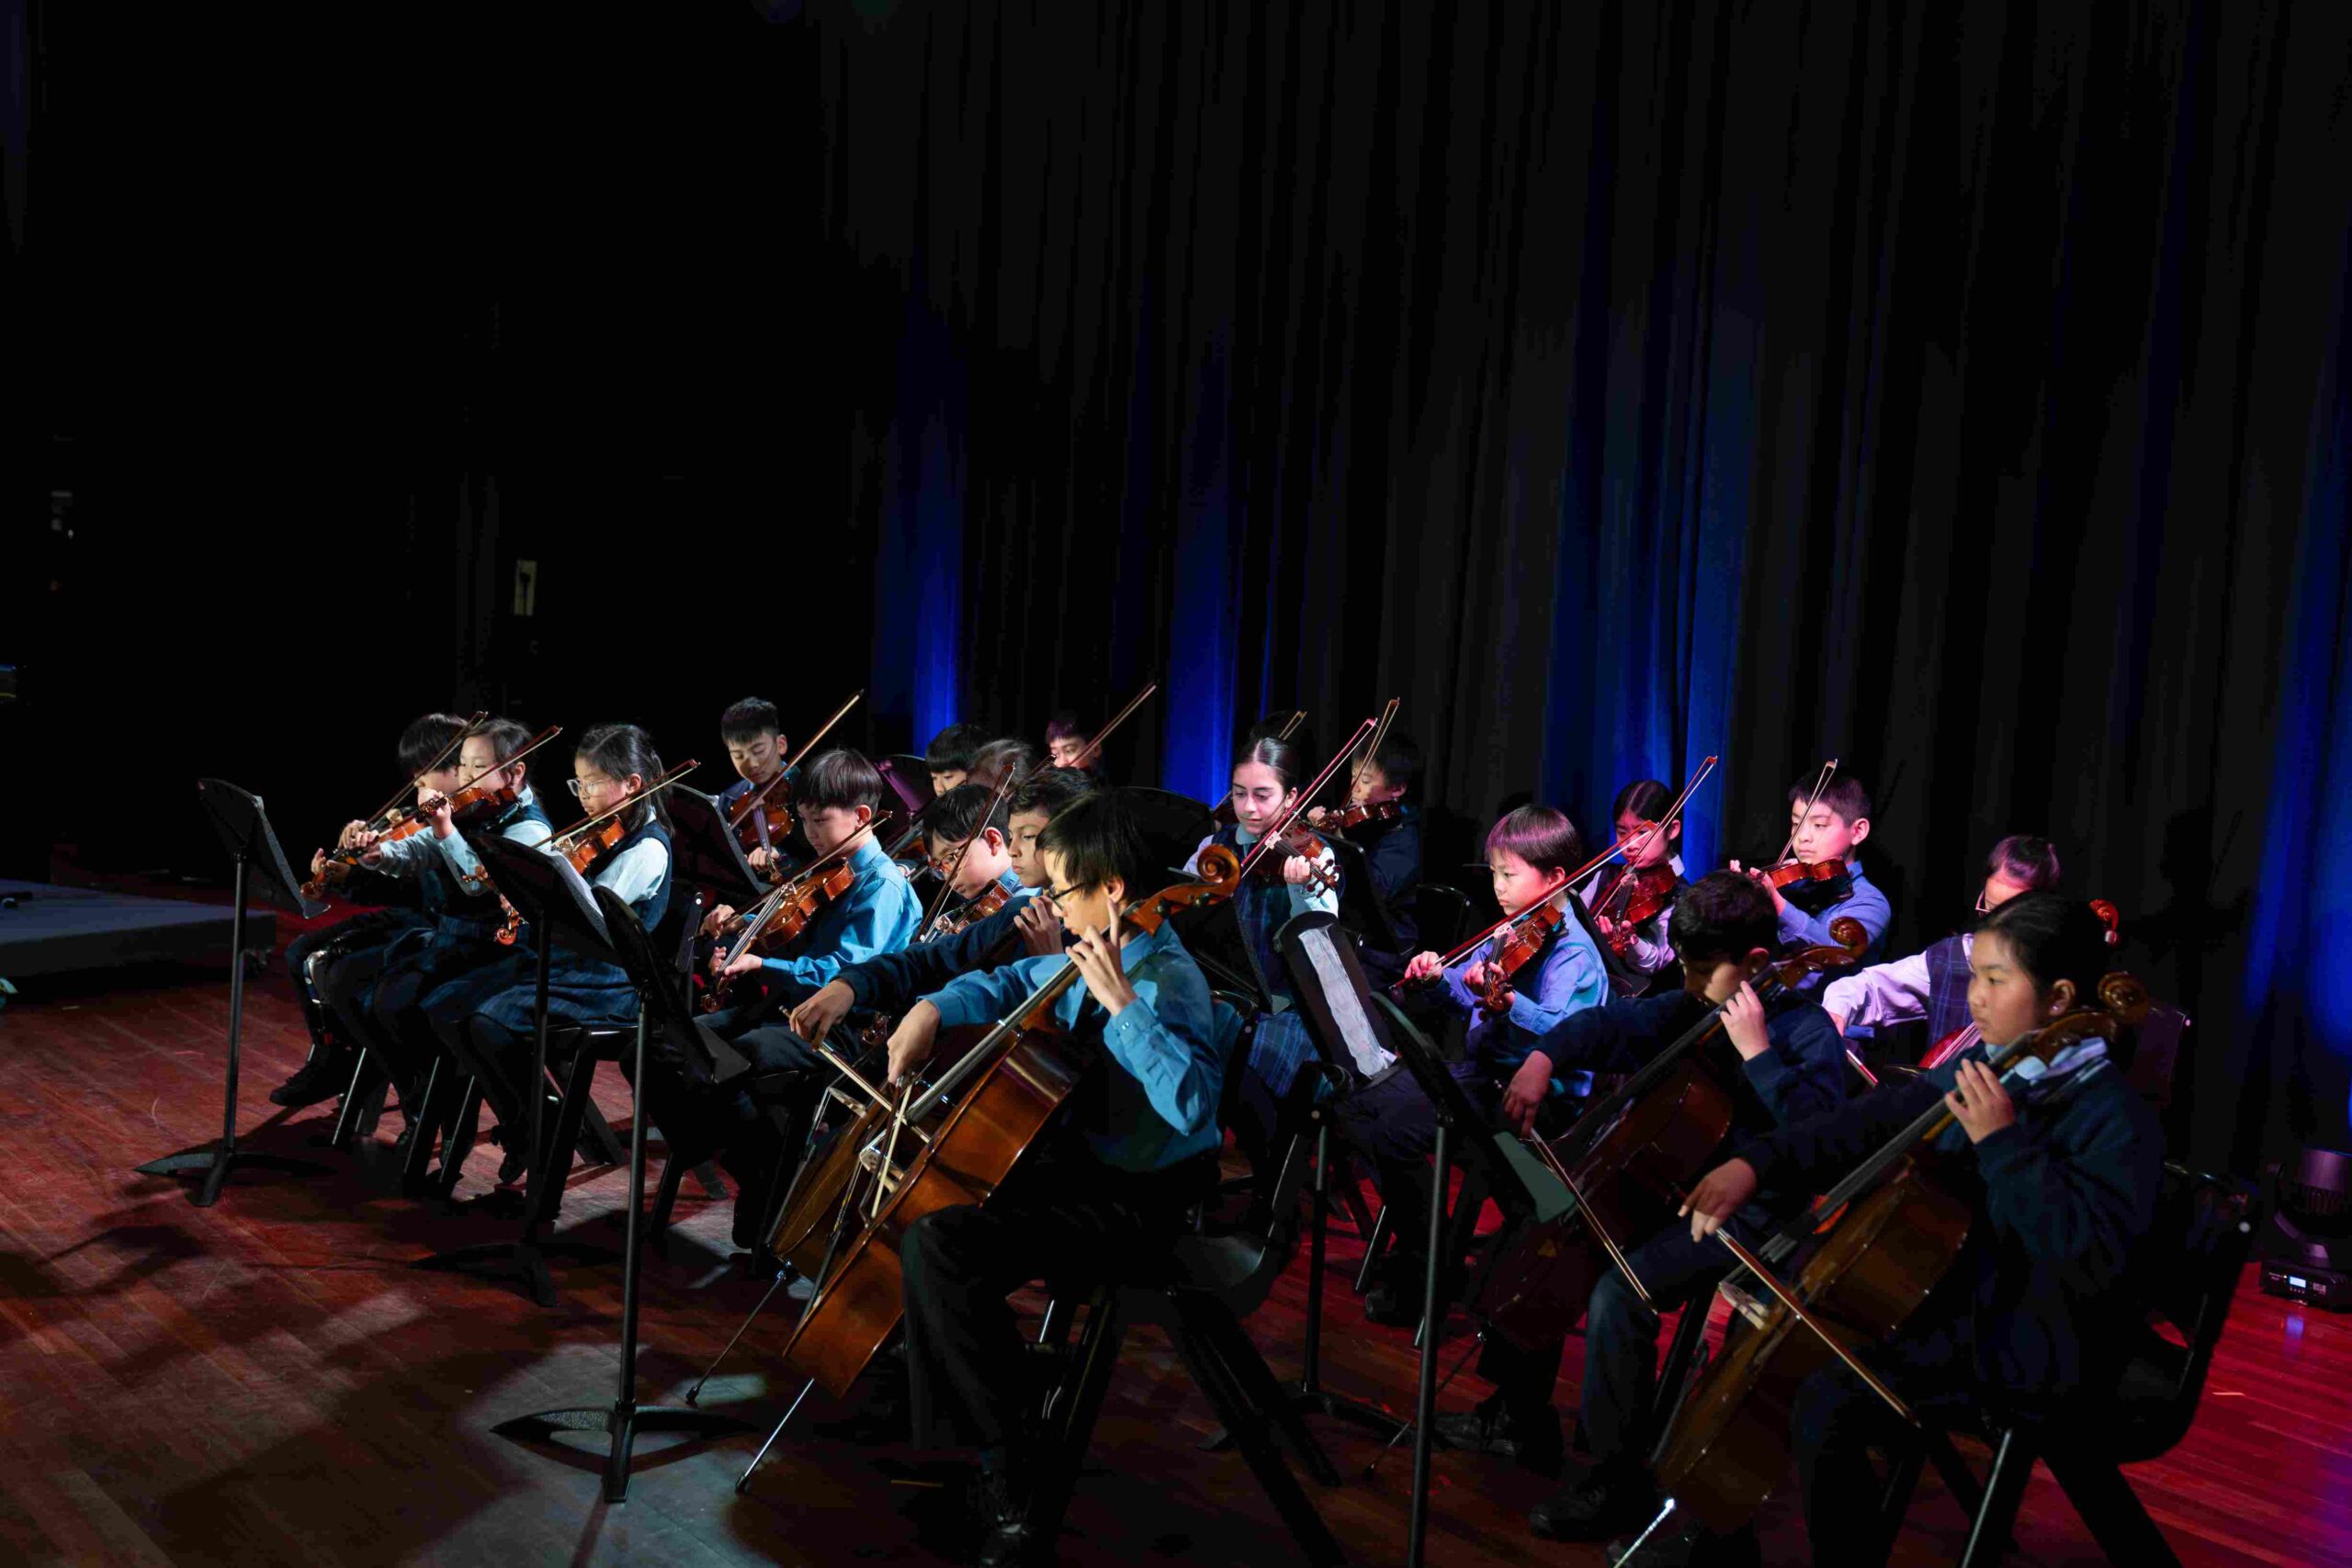 Sydney Catholic Schools students perform in an orchestra at the Eisteddfod Showcase